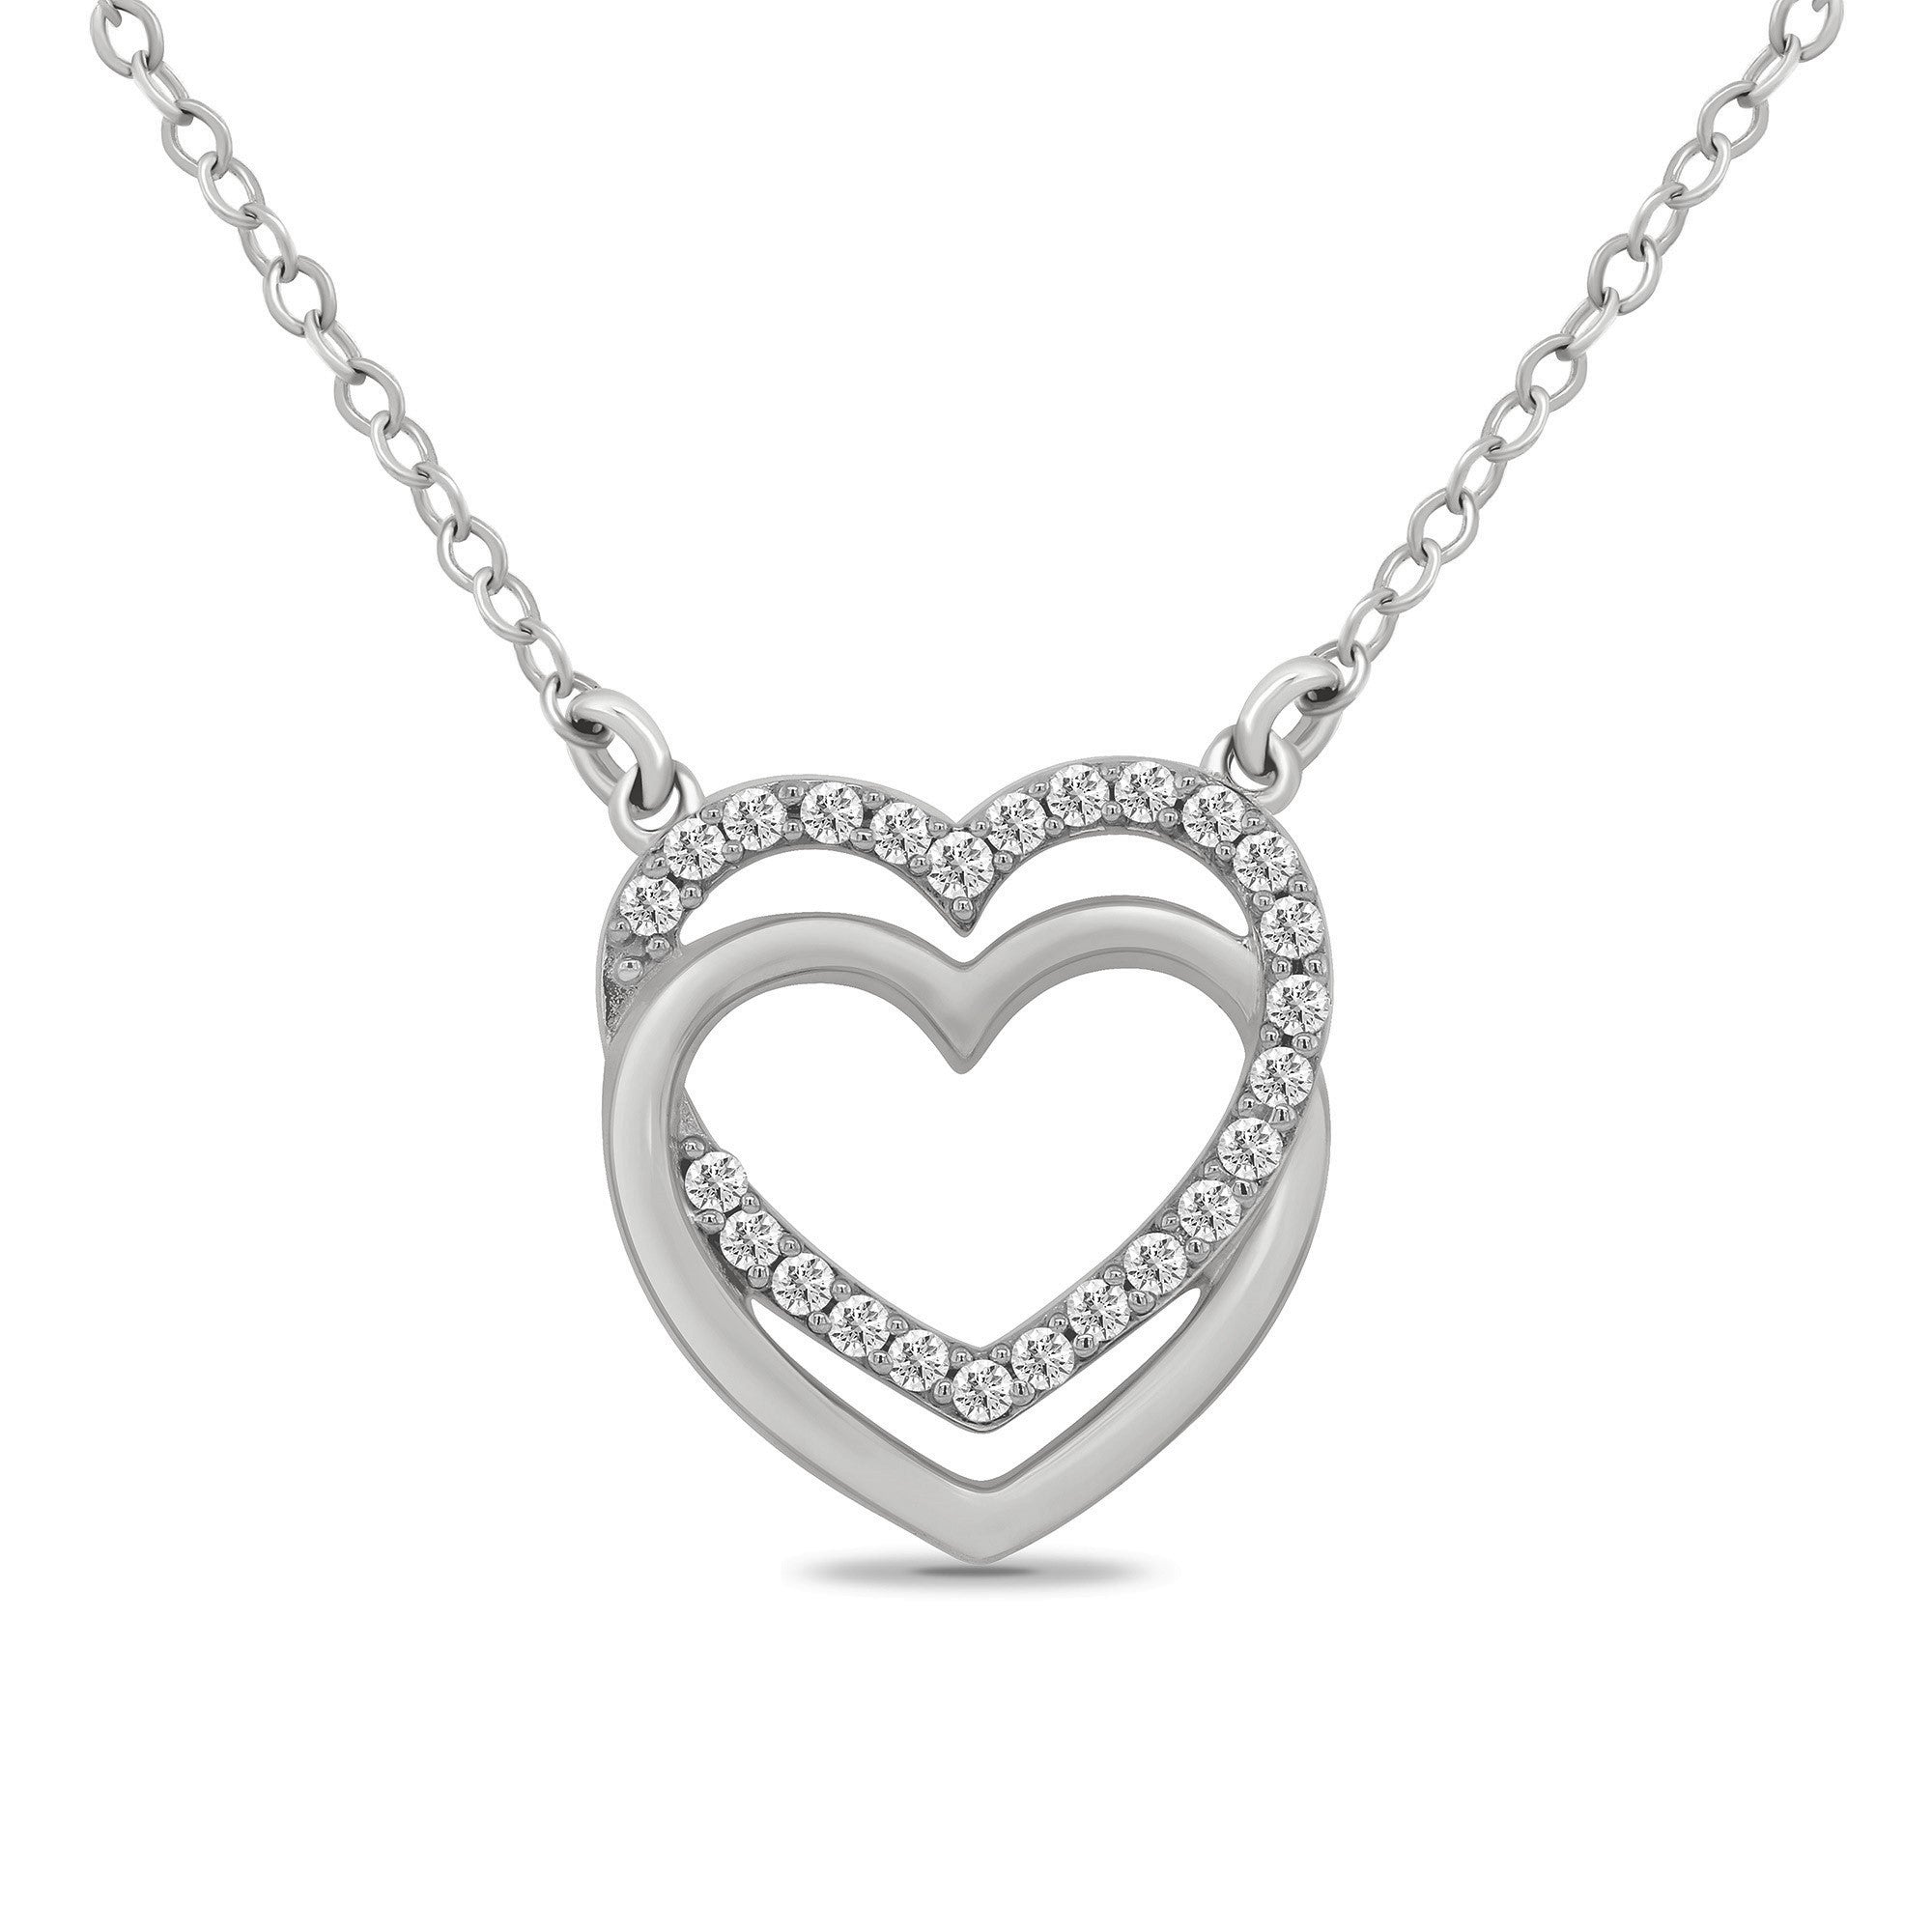 9ct white gold diamond set heart & entwined plain heart pendant with 18" chain (included ) 0.13ct